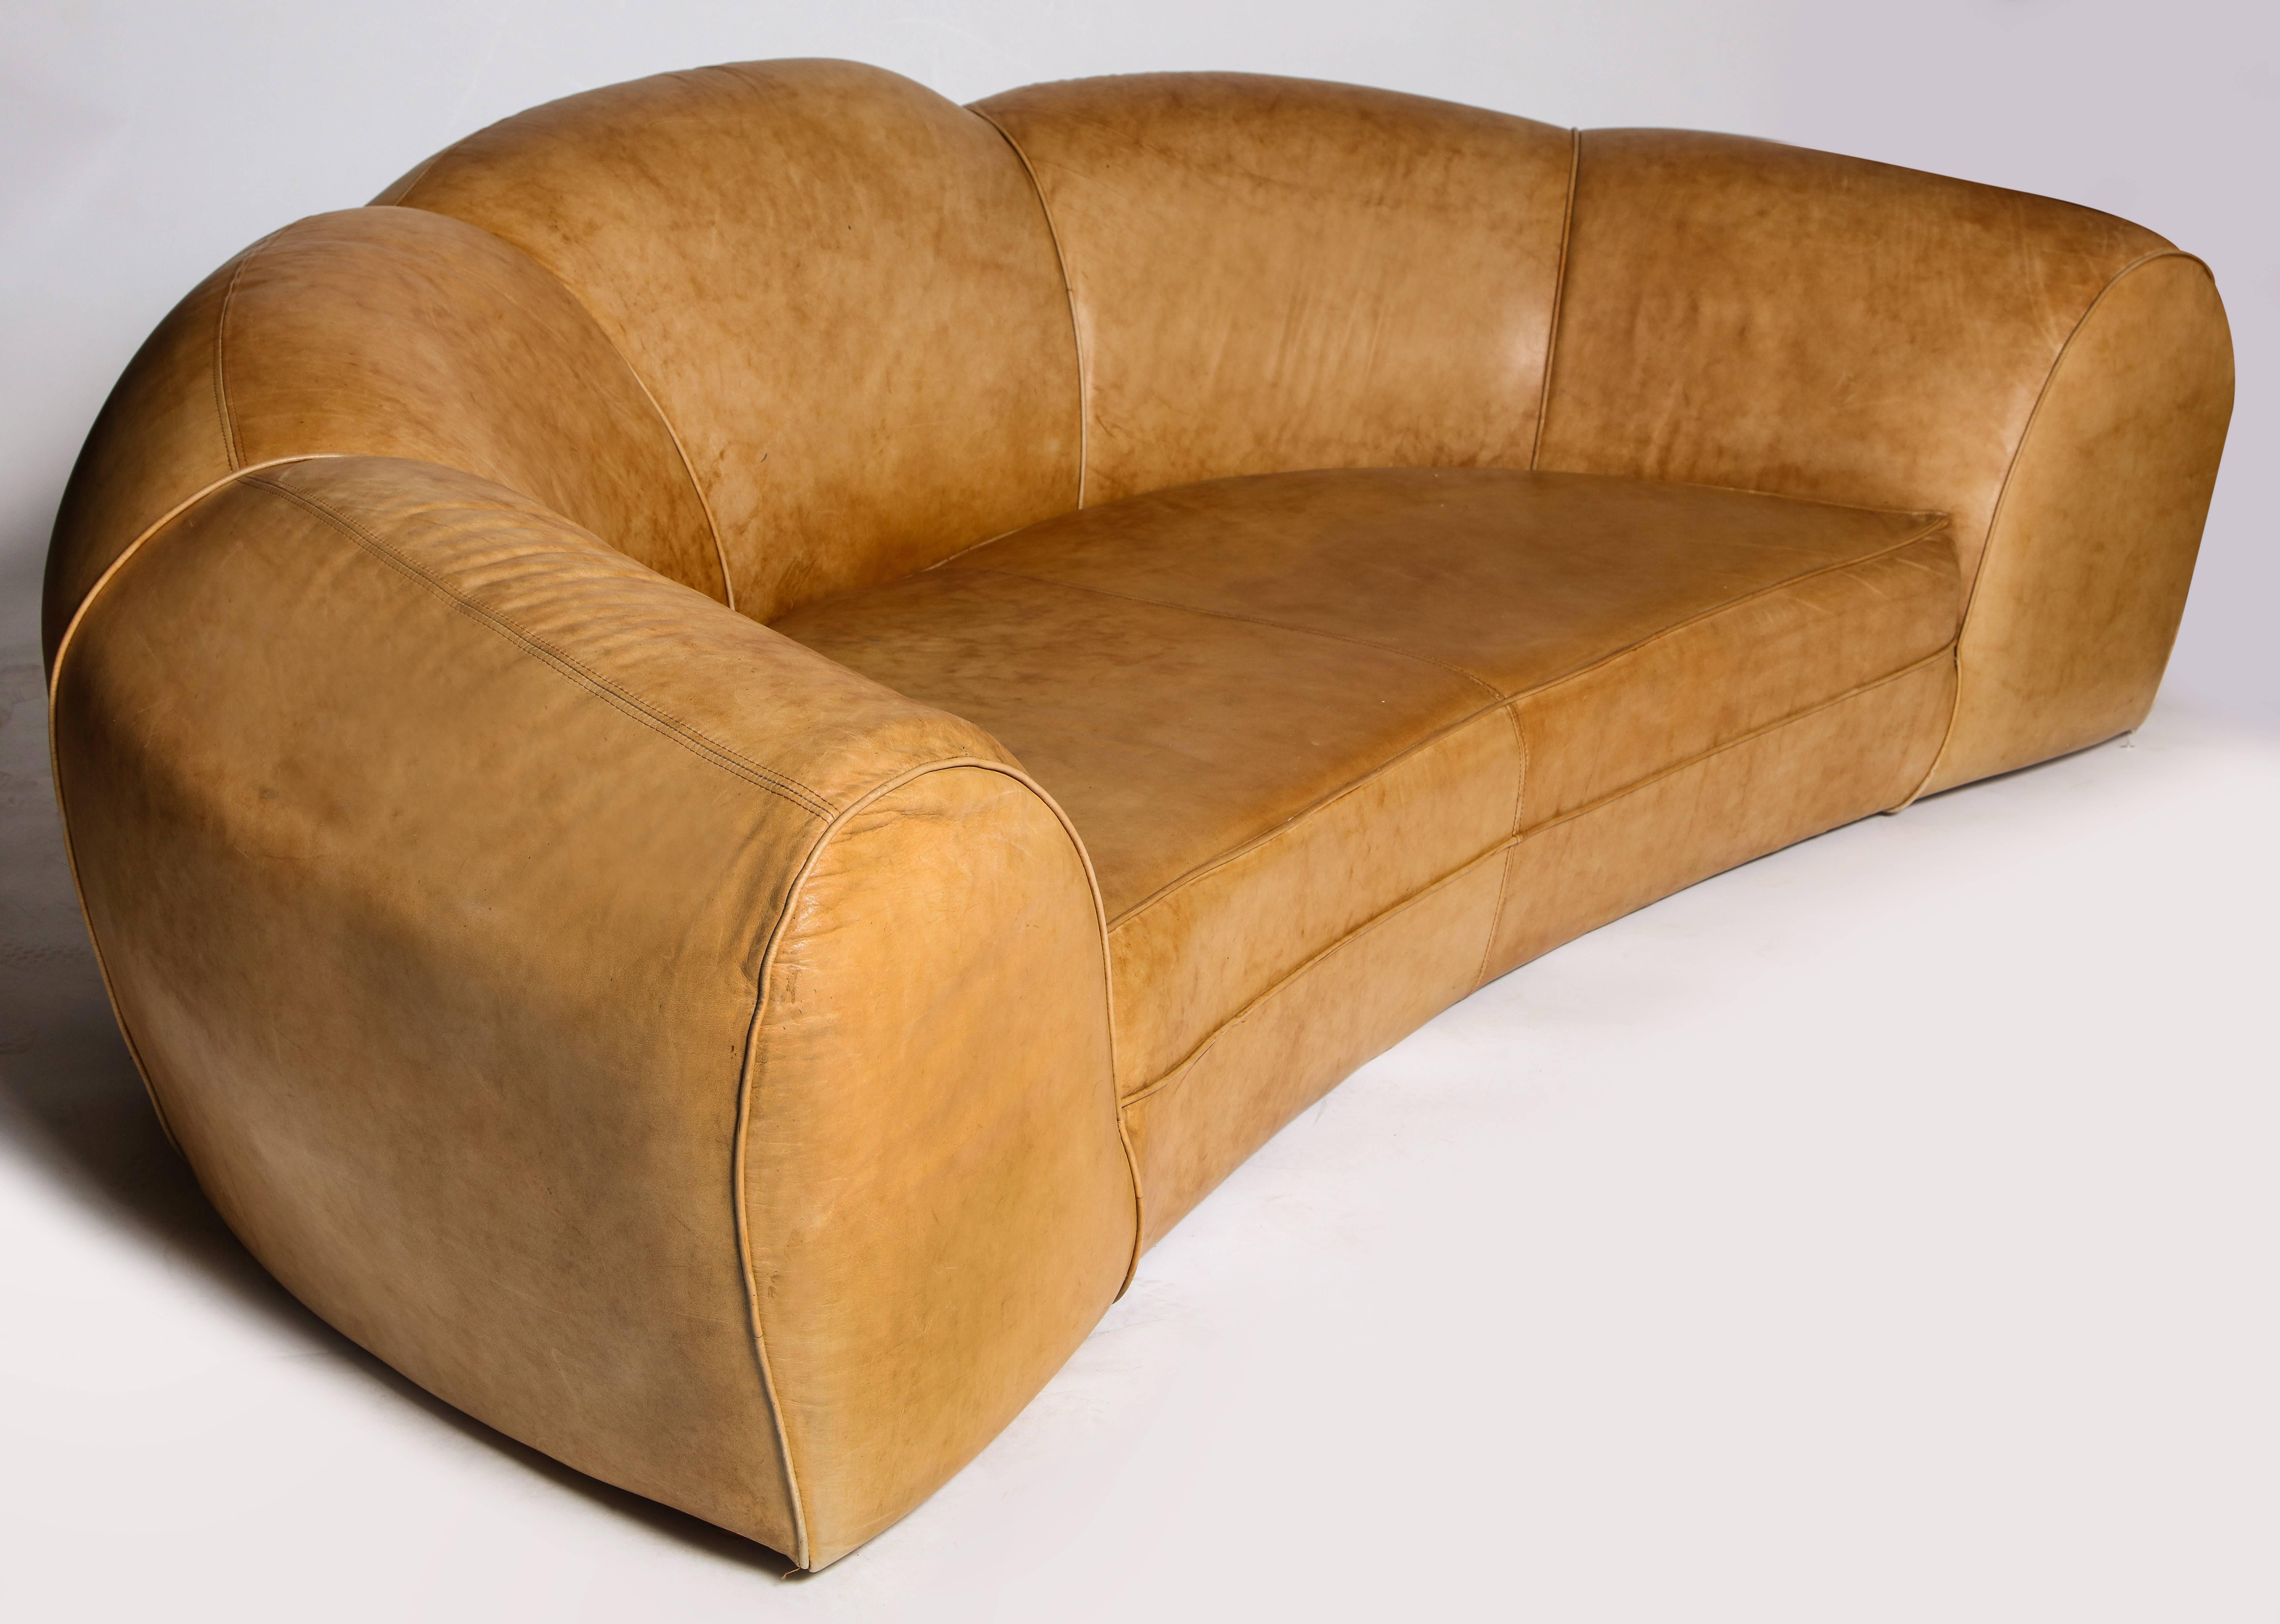 Jean Royere style polar bear monumental cresent brown leather sofa, 1980s, France

Absolutely unusual and huge leather sofa made in 1980s, France. The leather is very high quality and incredibly soft in beautiful condition. This is a very large